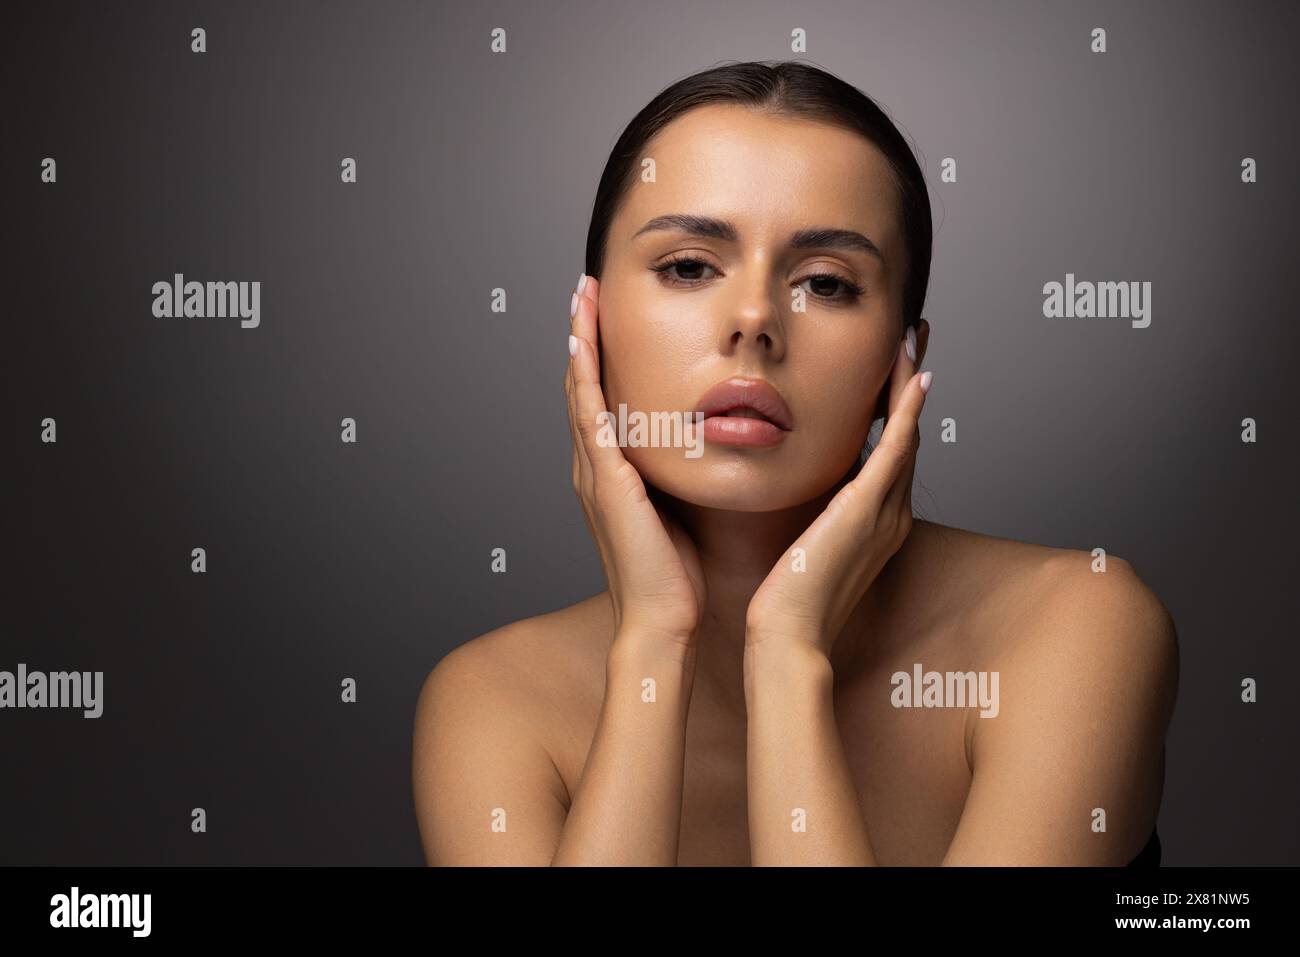 Beauty concept, head and shoulders portrait of beautiful model with nude make-up looking at camera, touching face, closeup. Brunette woman in studio w Stock Photo